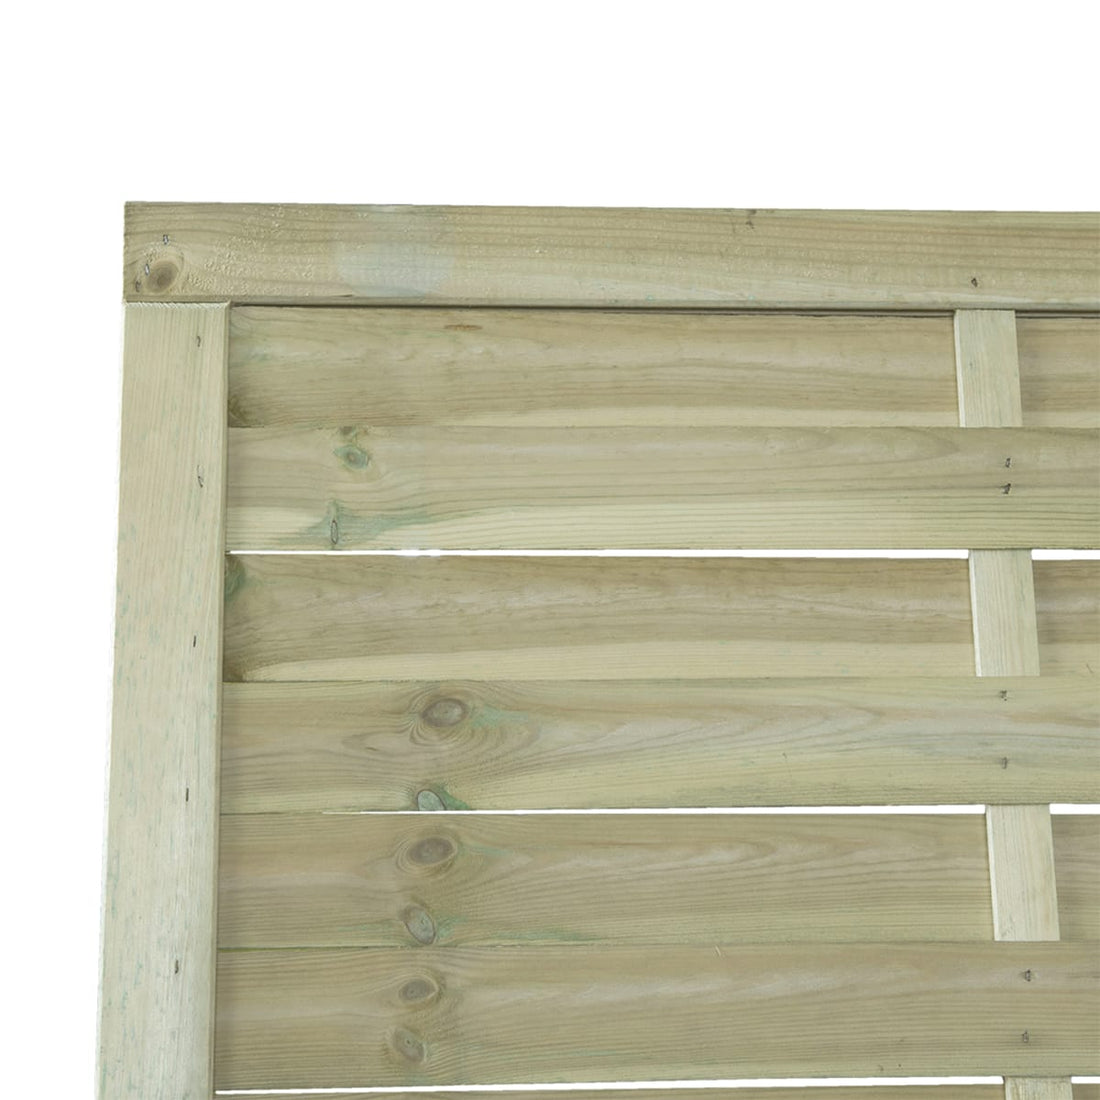 90X180 CM WOODEN FENCE IN AUTOCLAVE-TREATED PINE WOOD